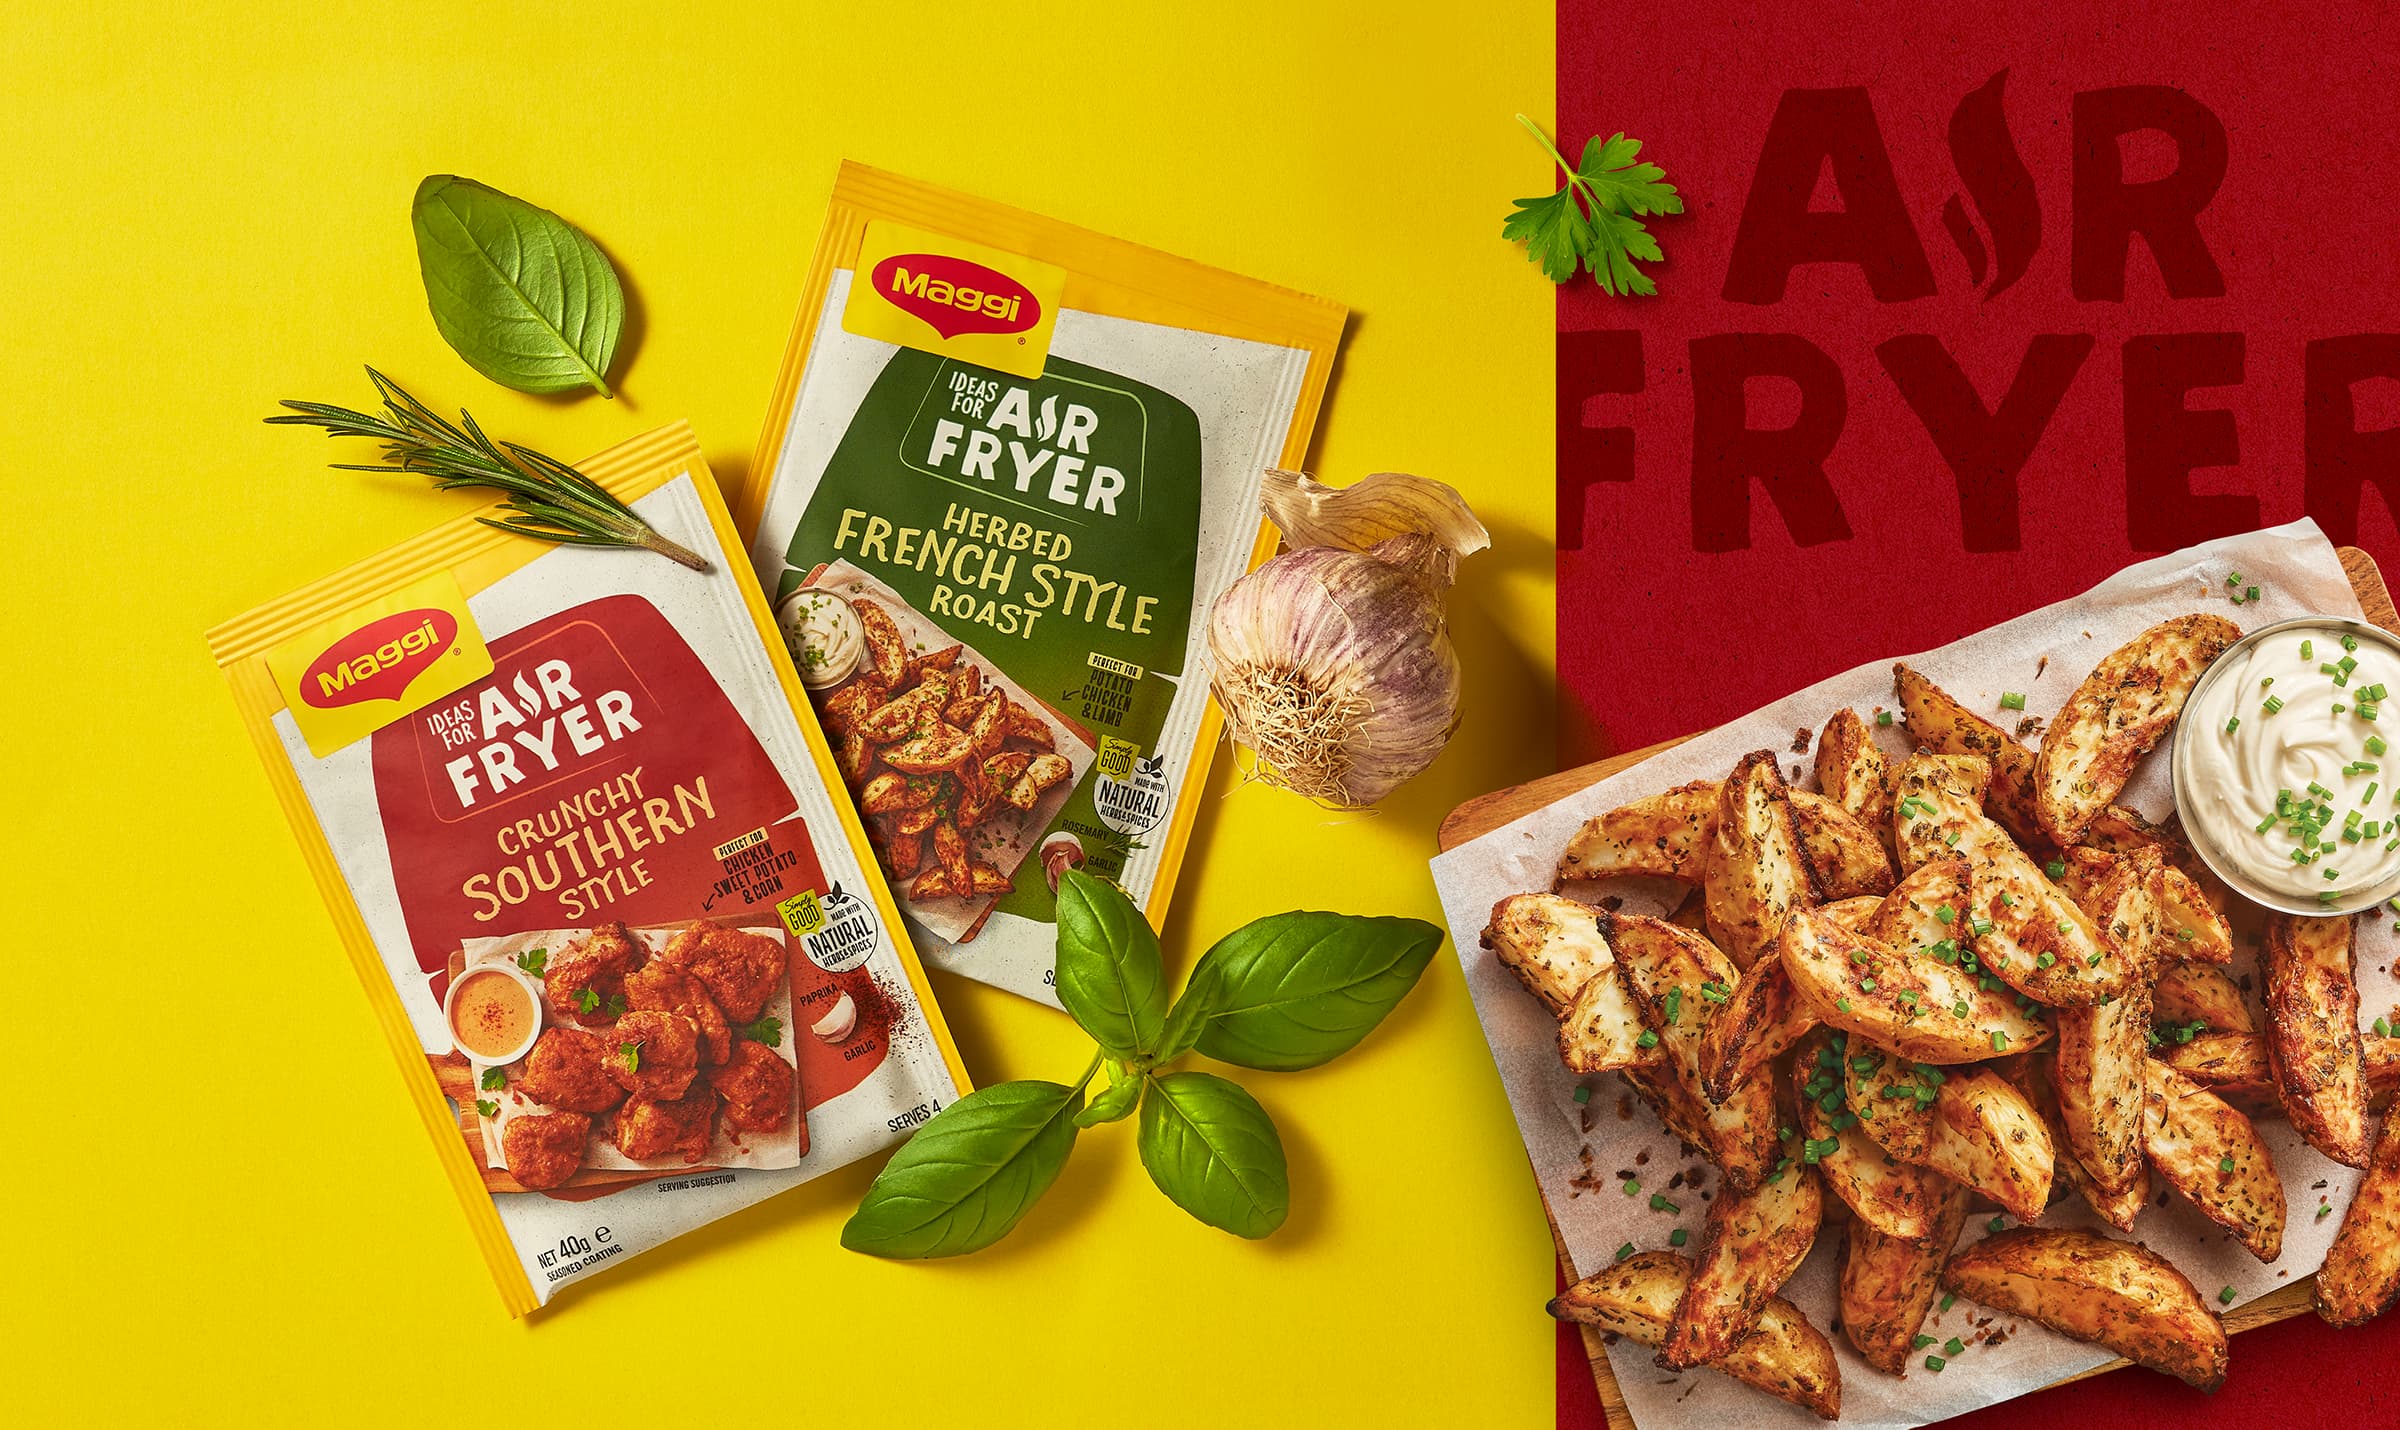 boxer-and-co-air-fryer-maggi-pack-packaging-redesign-design-crunchy-southern-style-herbed-french-style-roast-chicken-garlic-basil-rosemary-wedges-chips-dip